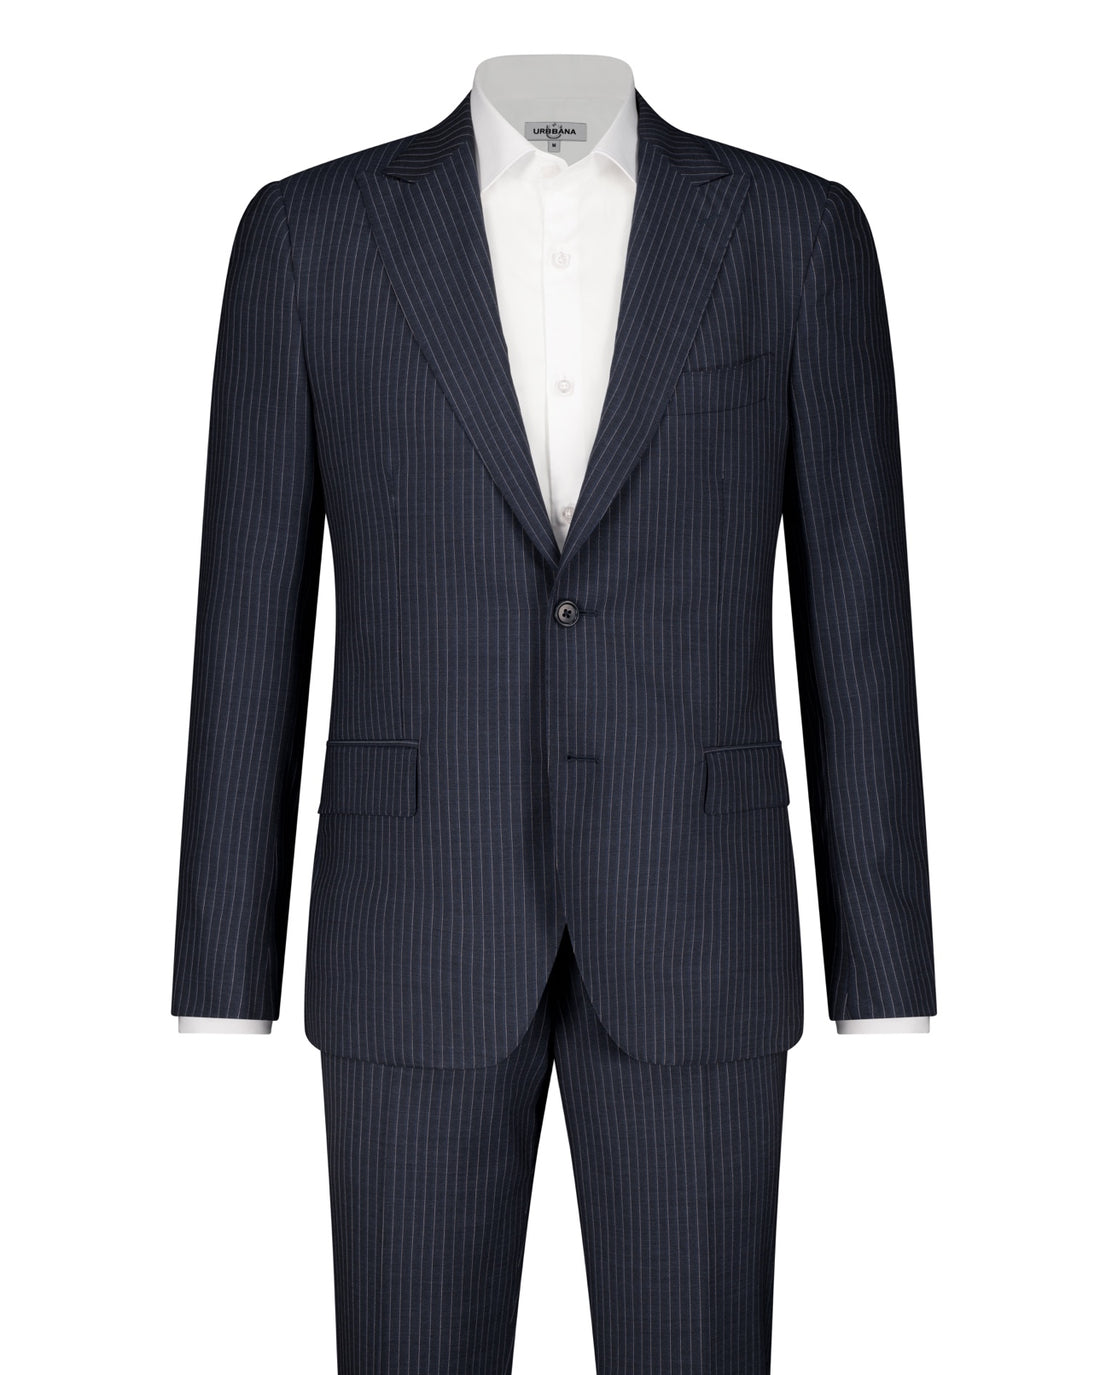 Belford Zegna Cloth Suit - Navy - Made in Italy